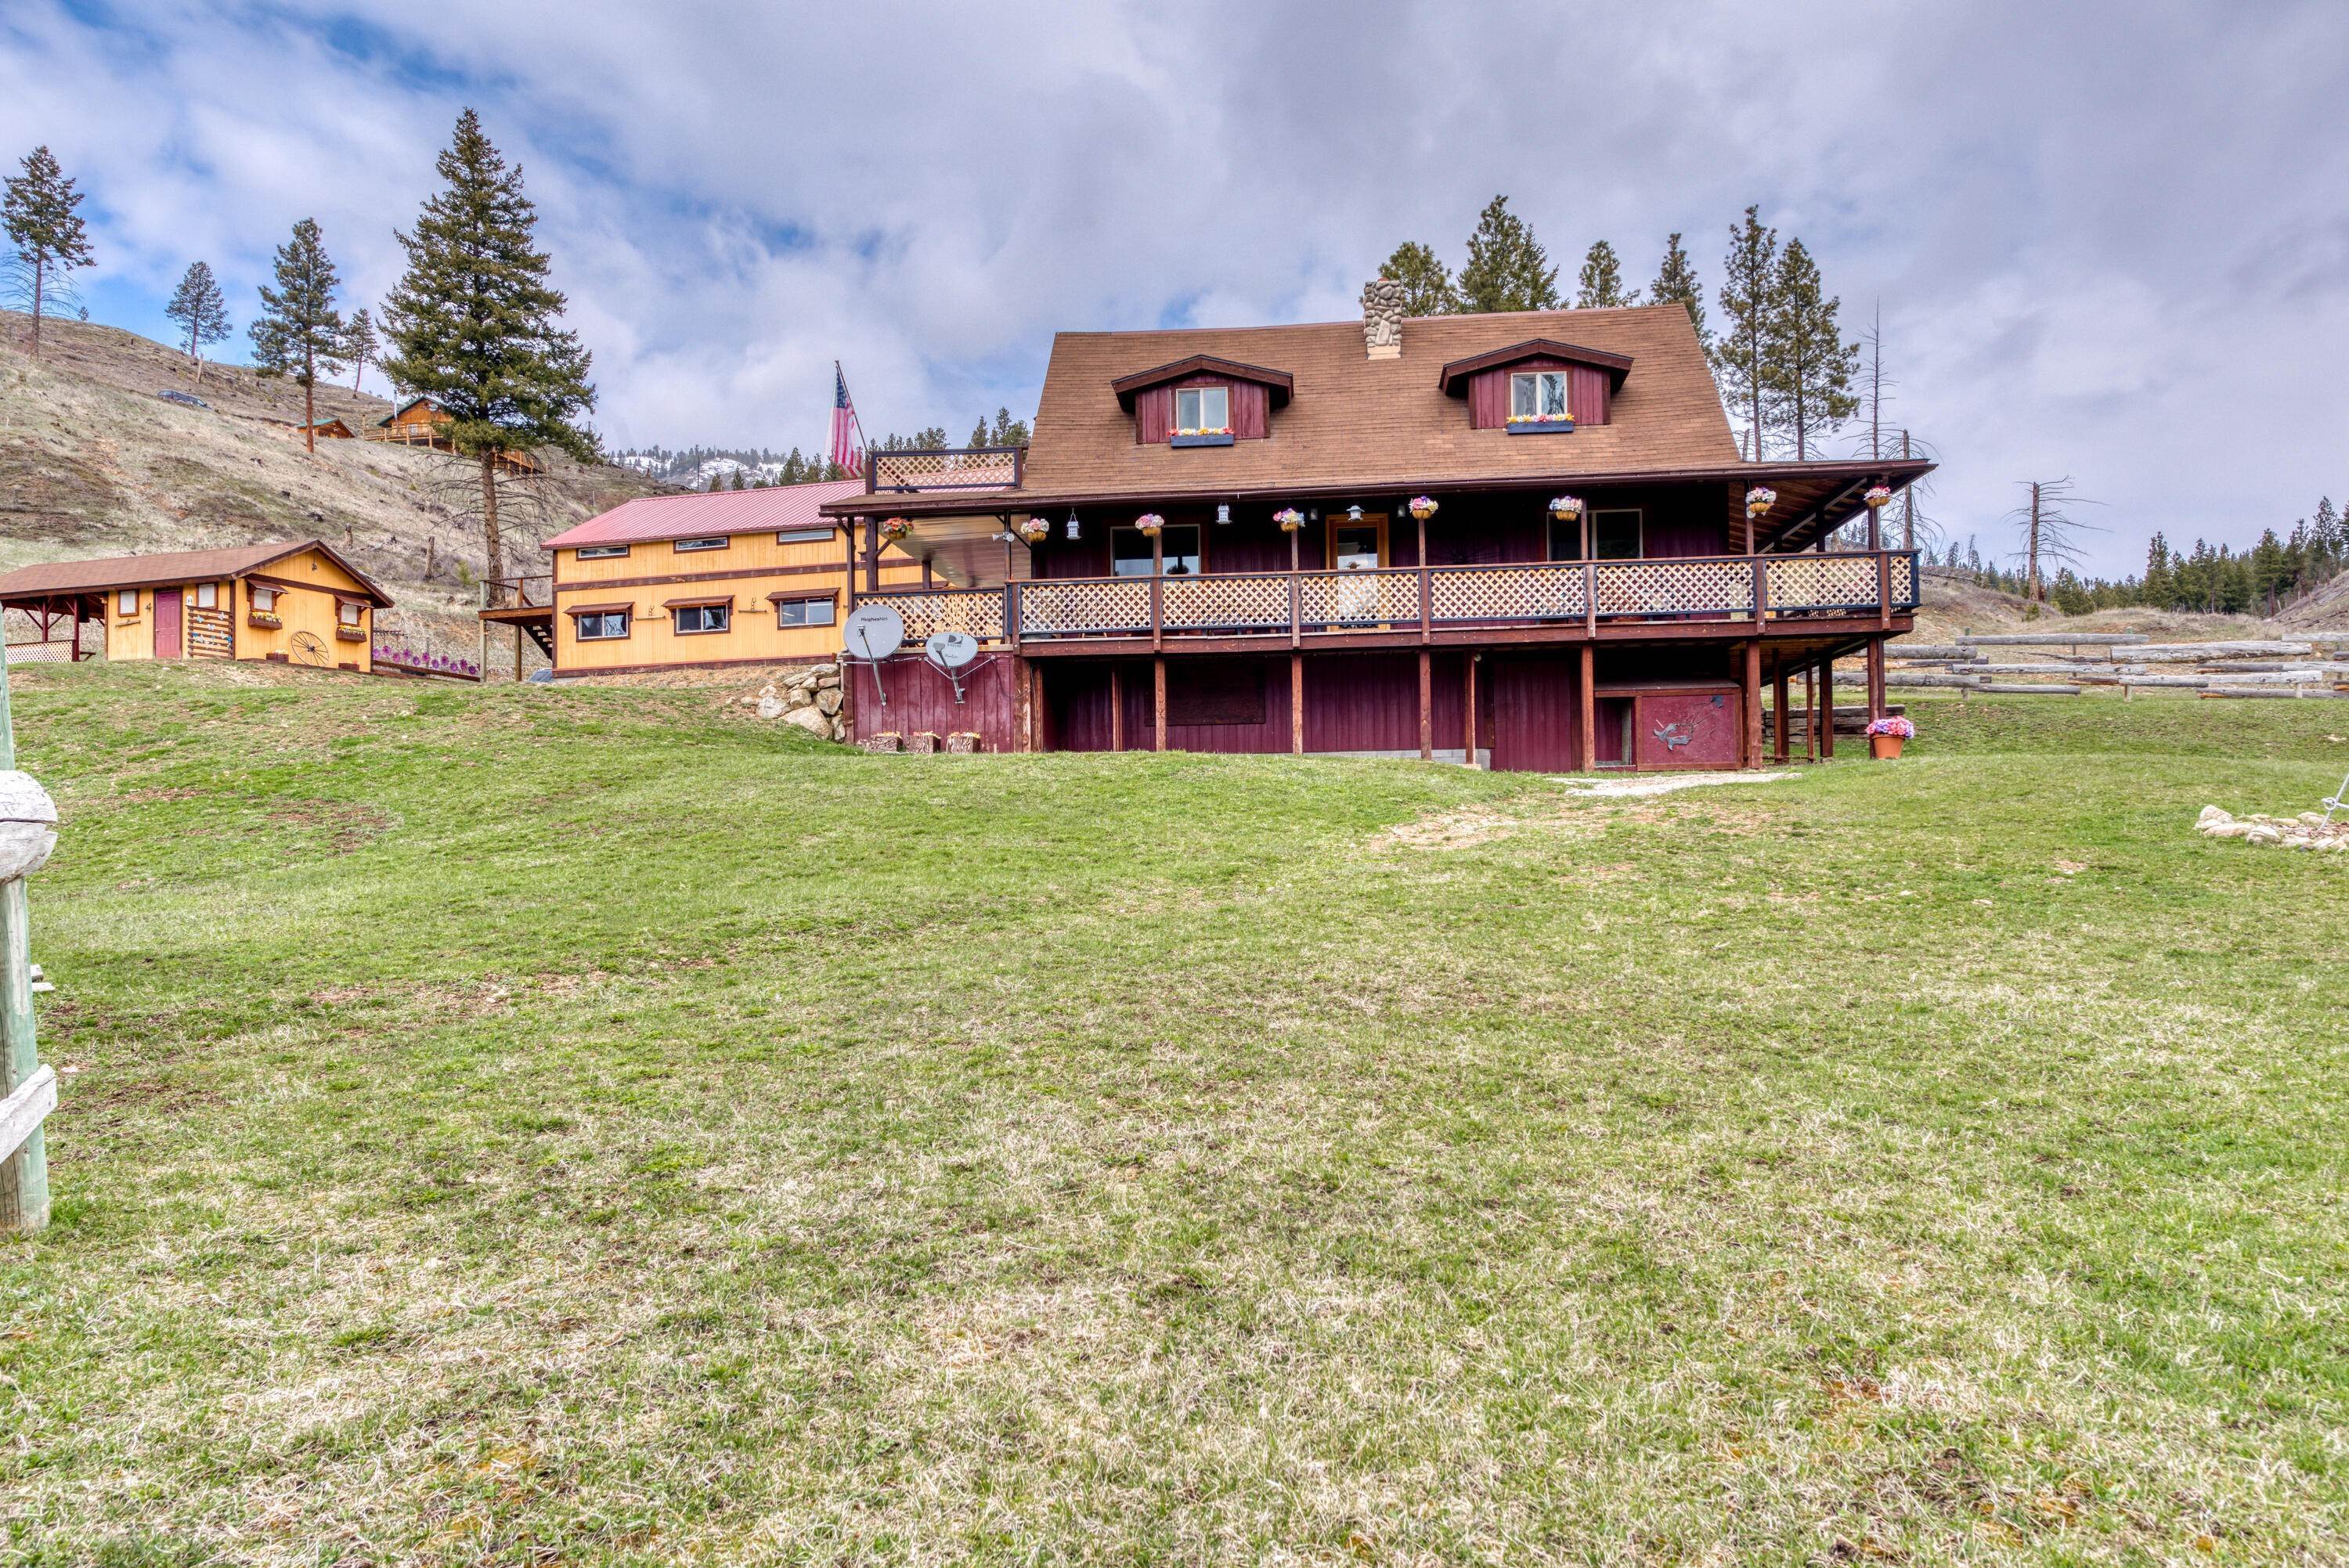 2. Single Family Homes for Sale at 4583 Dugout Gulch Road, Darby, Montana 59829 United States